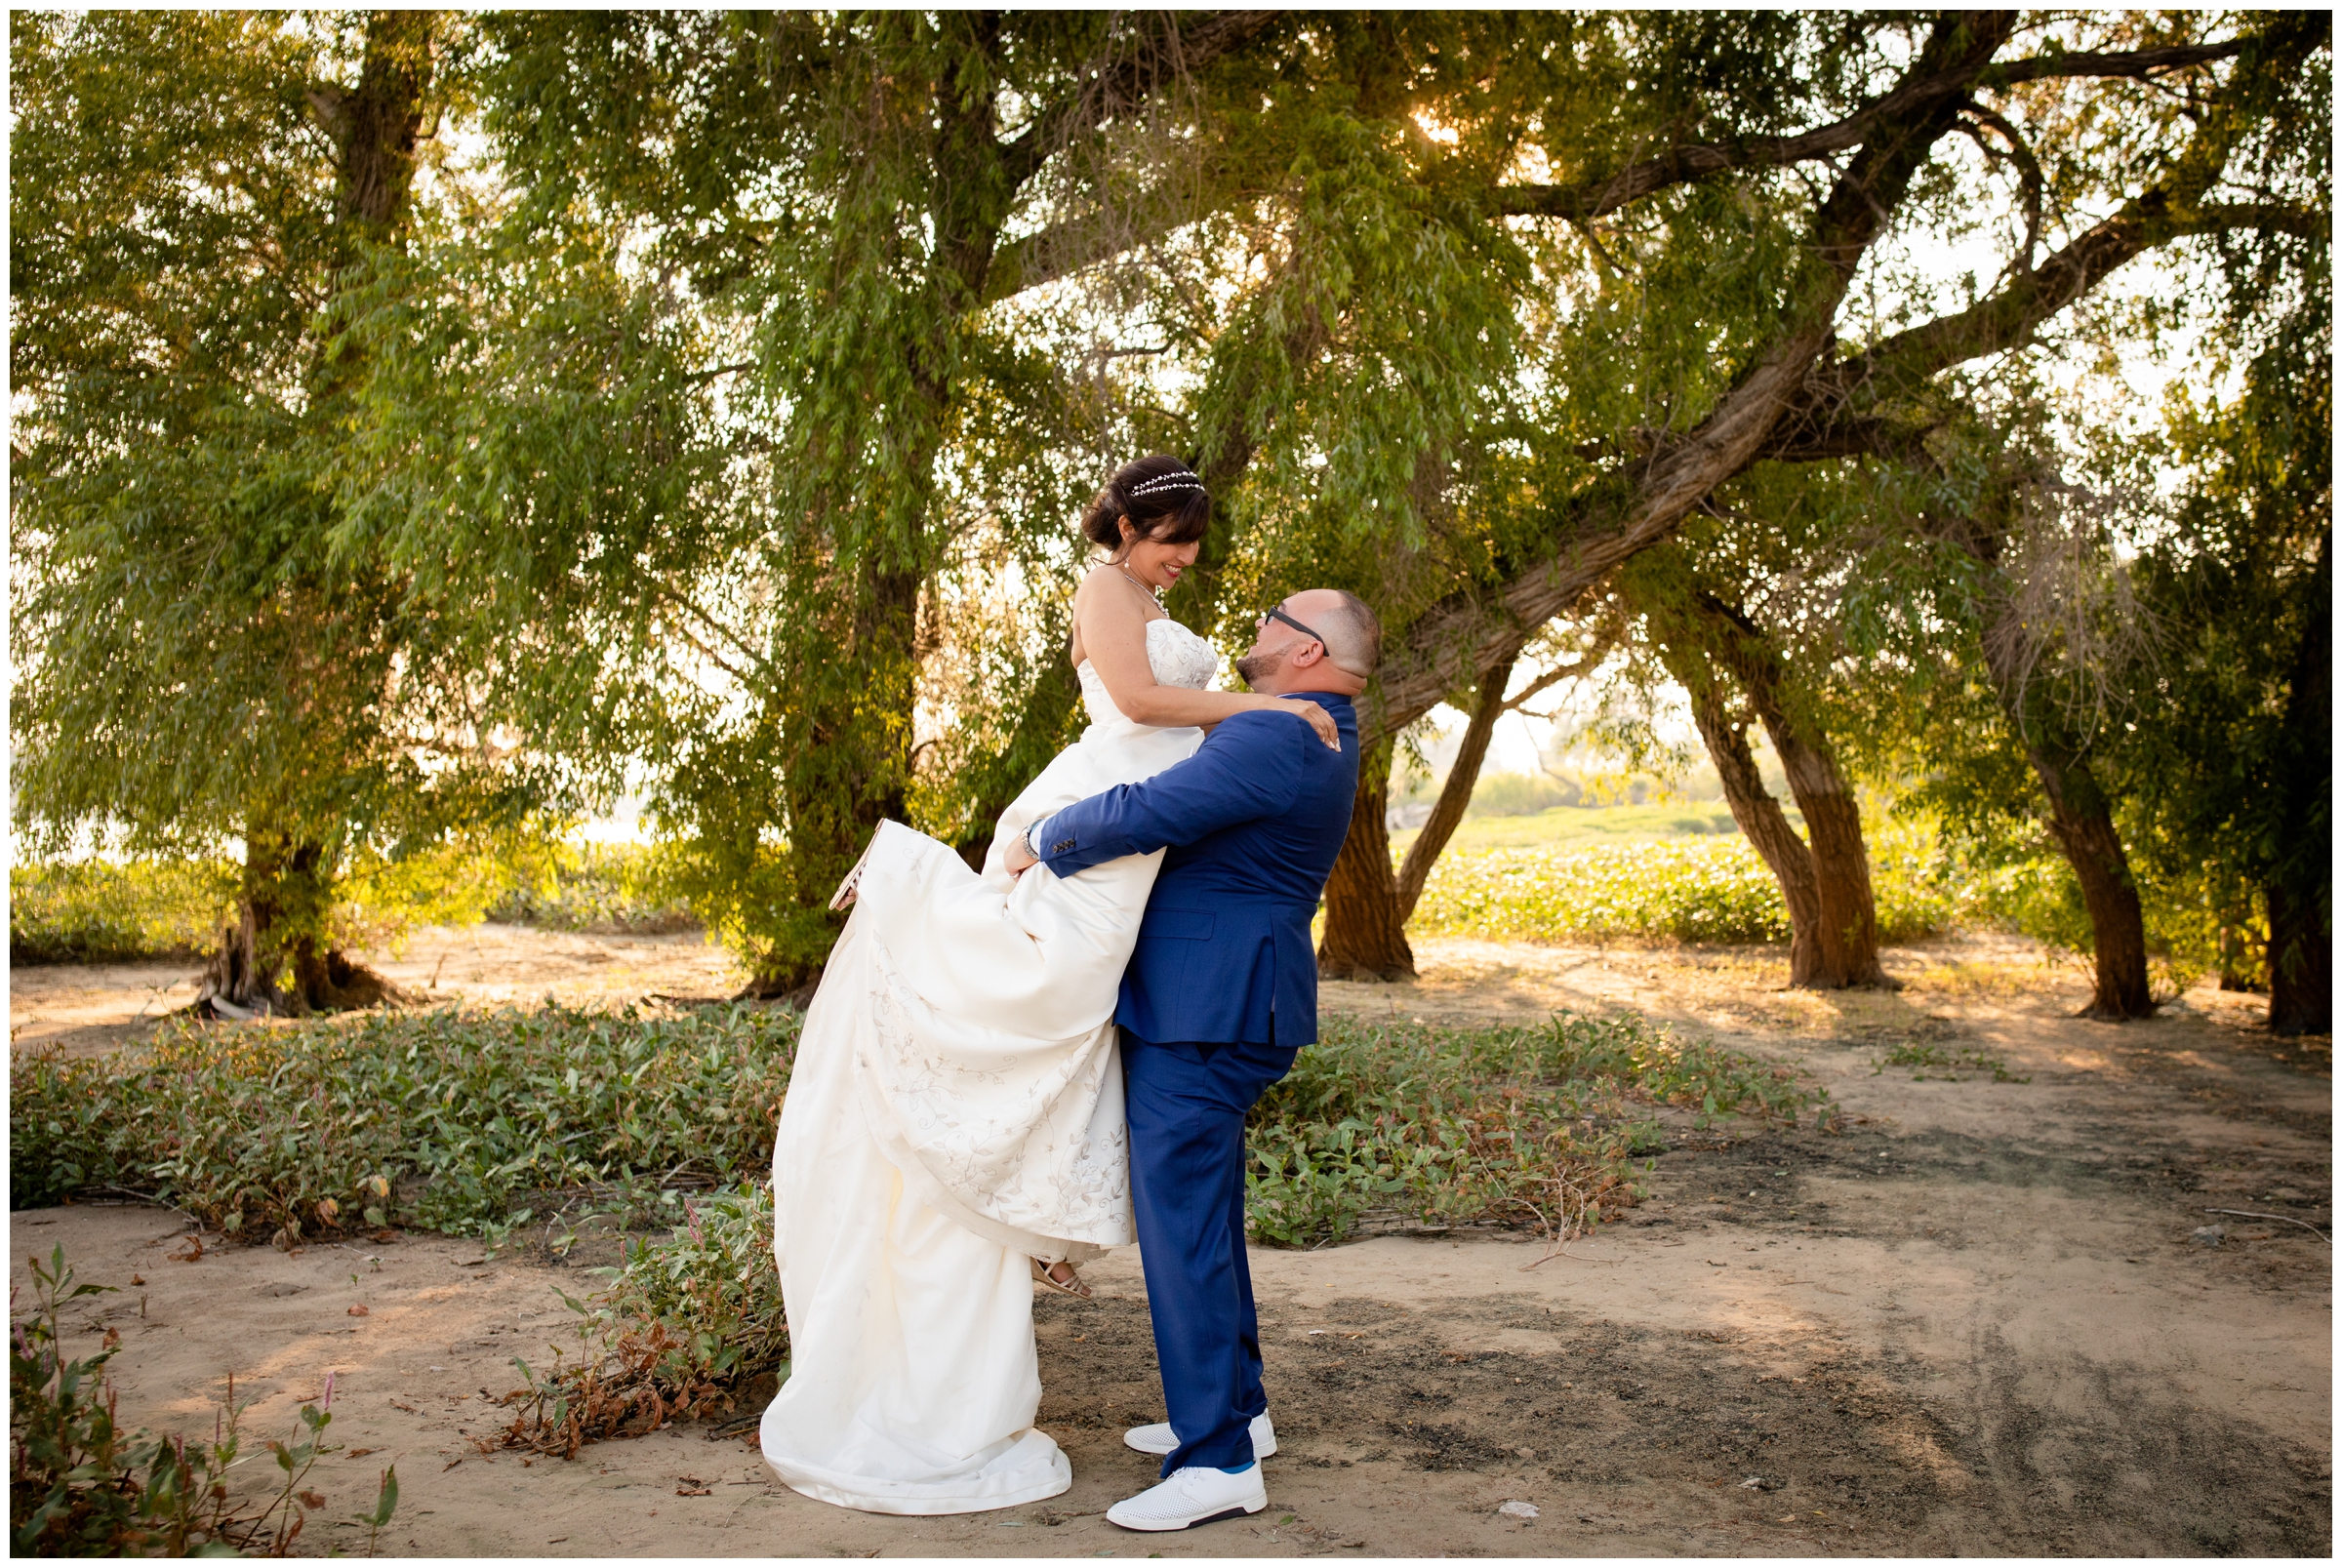 Barr Lake State Park wedding photos at sunrise by Colorado photographer Plum Pretty Photography